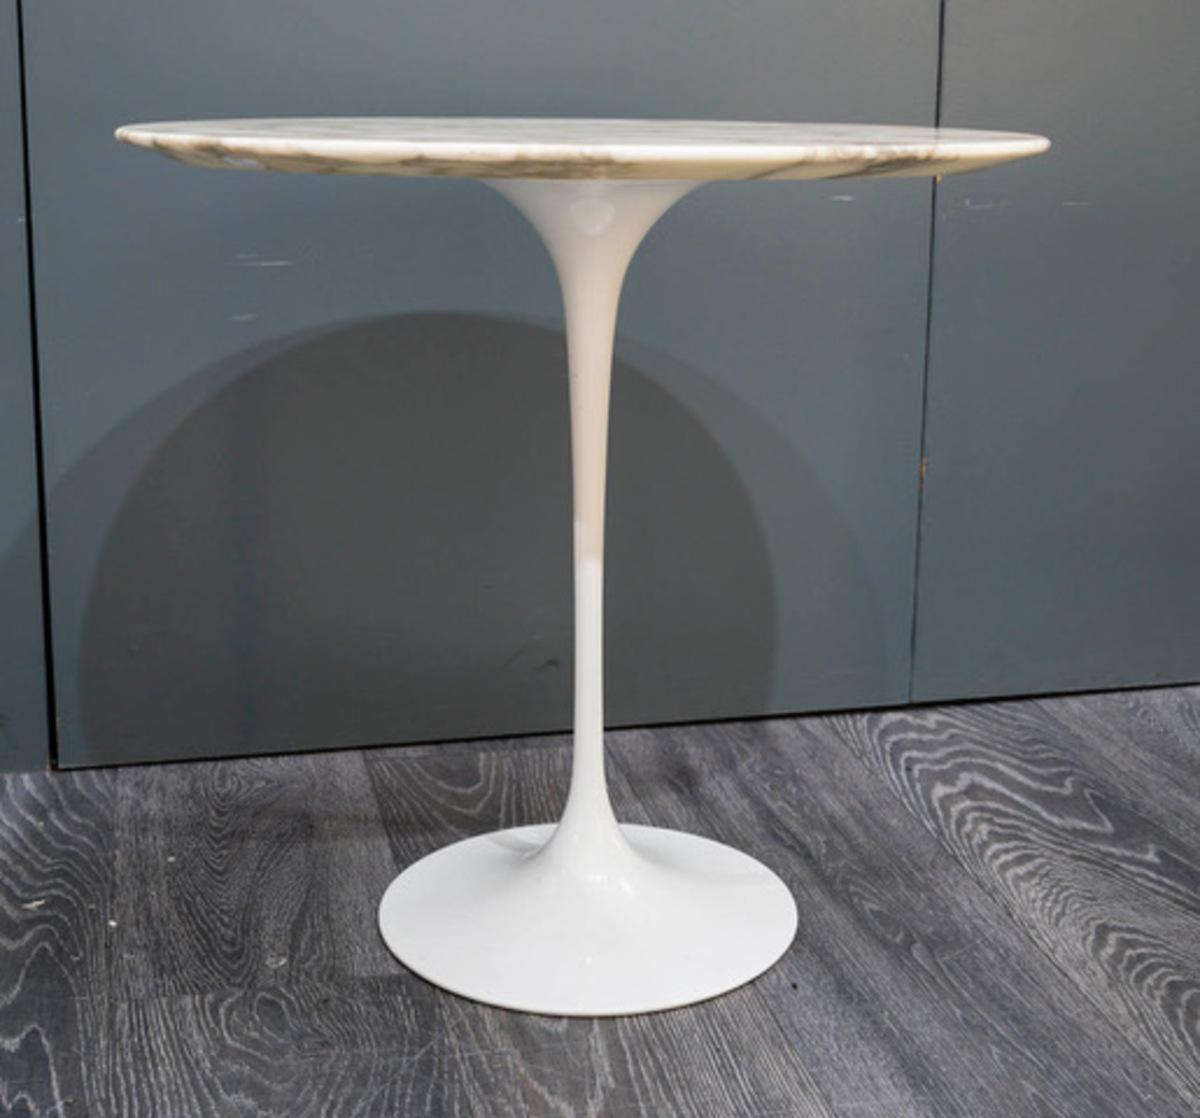 Eero SAARINEN (1910-1961), Edition Knoll : Oval pedestal table in Calacatta oro marble, Aluminium base covered with white Rilsan.

Signed under the foot 
Height: 51cm
56 cm X 38 cm  